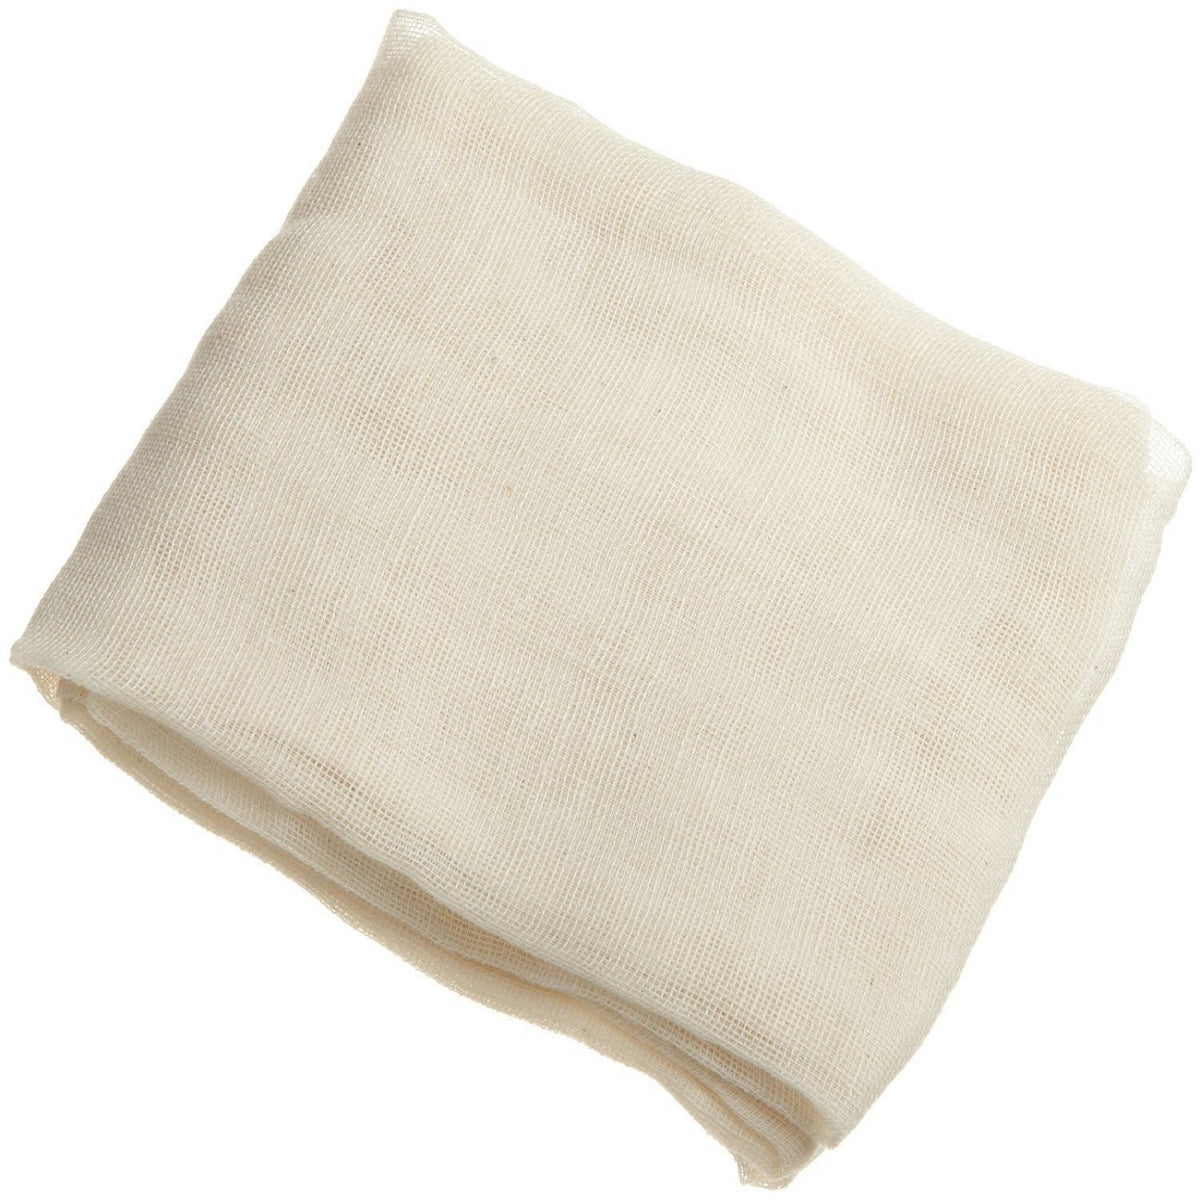 Cheesecloth - Yemoos Nourishing Cultures